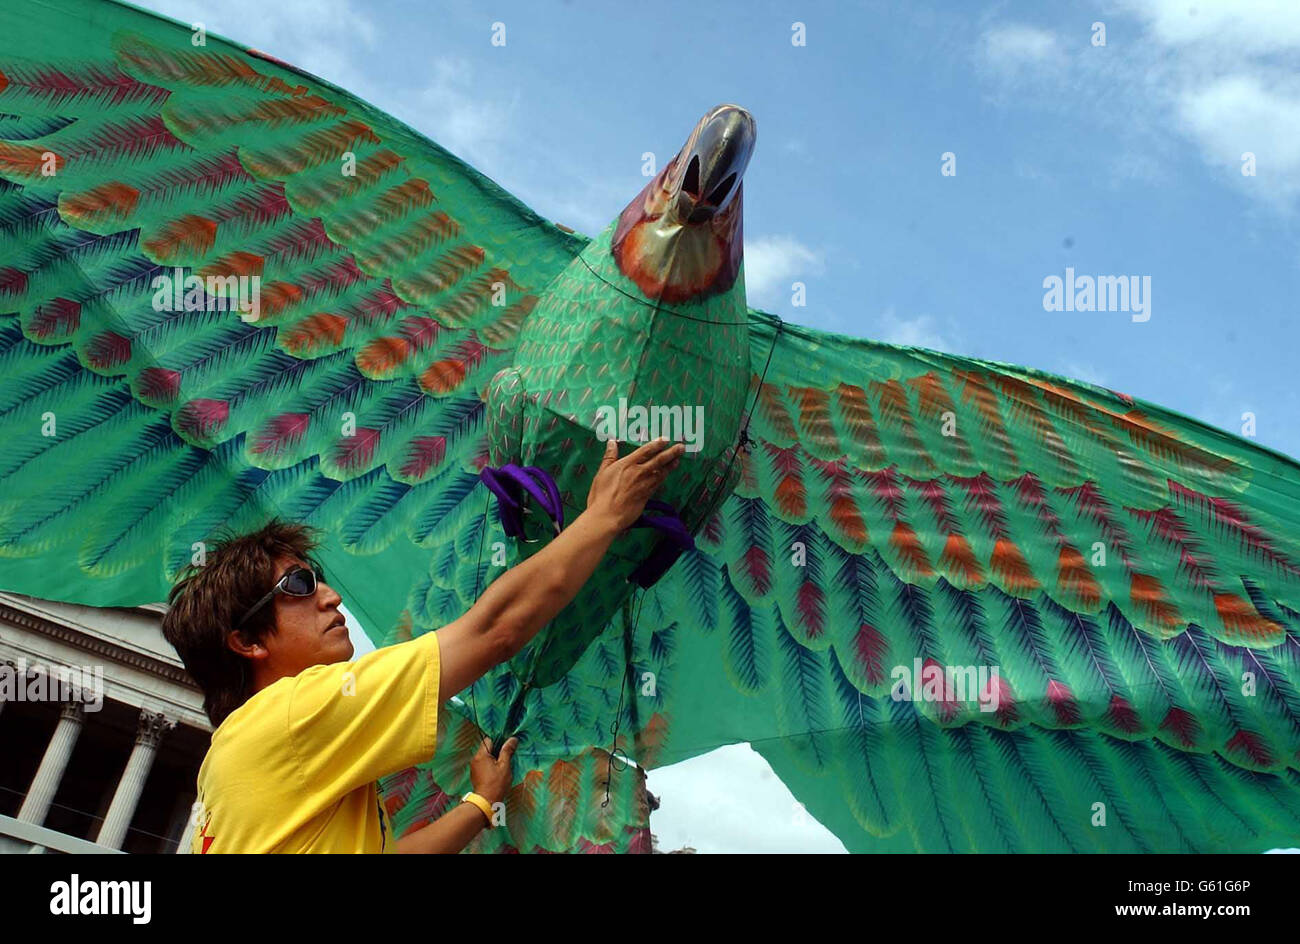 Afghan kite flying festival in Trafalgar Square, London, performed by artist Nasser Volant, as part of the London Mayor's Summer in the Square events programme. Nasser holds one of his sculptured kites Stock Photo